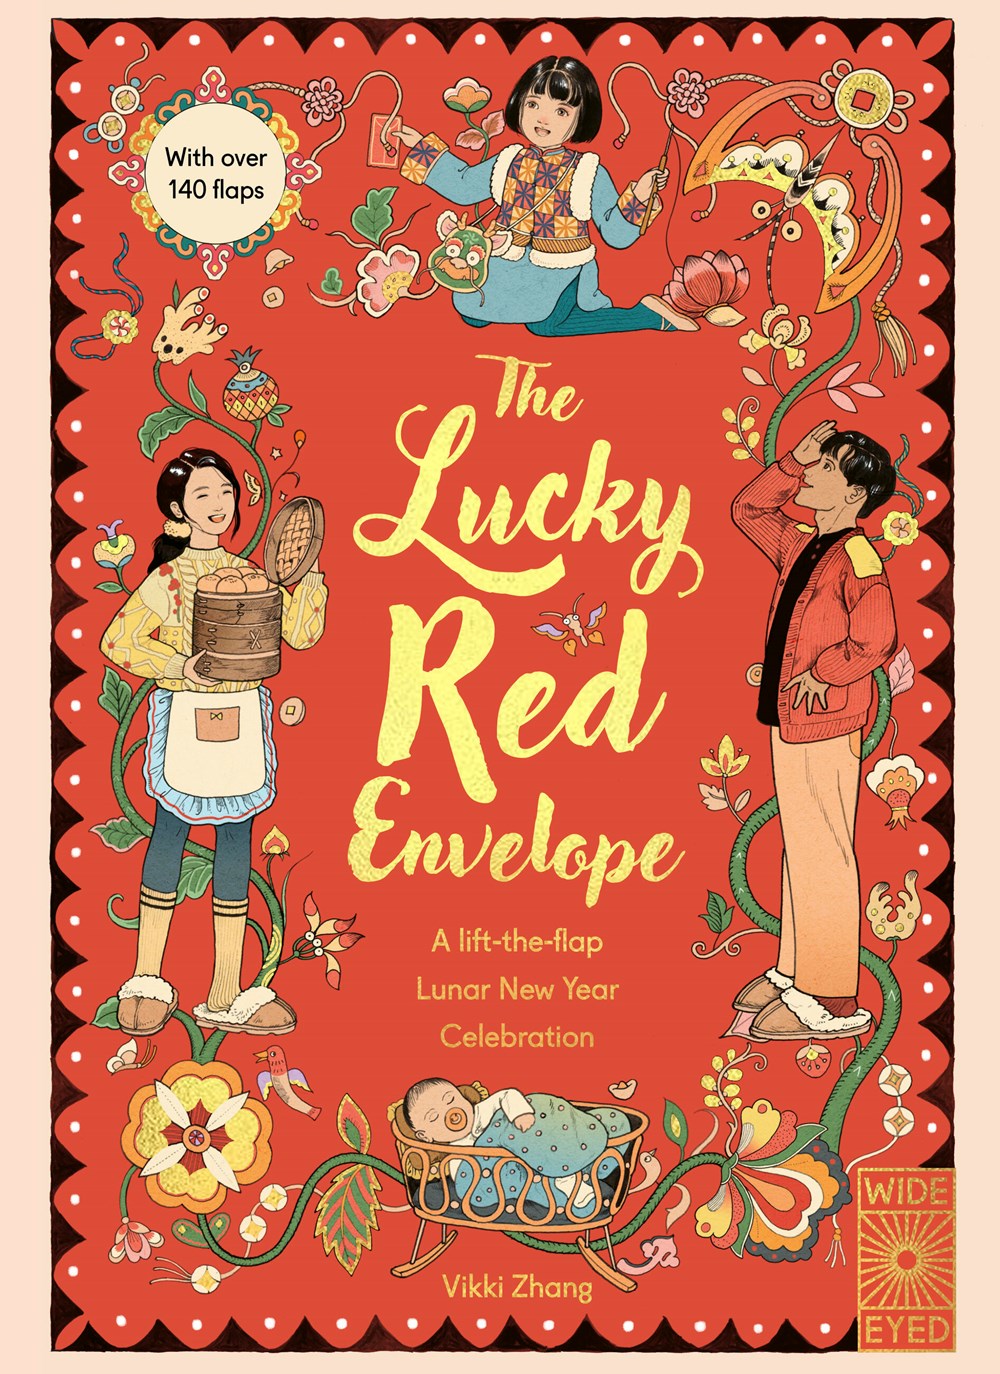 Cover of The Lucky Red Envelope by Vikki Zhang